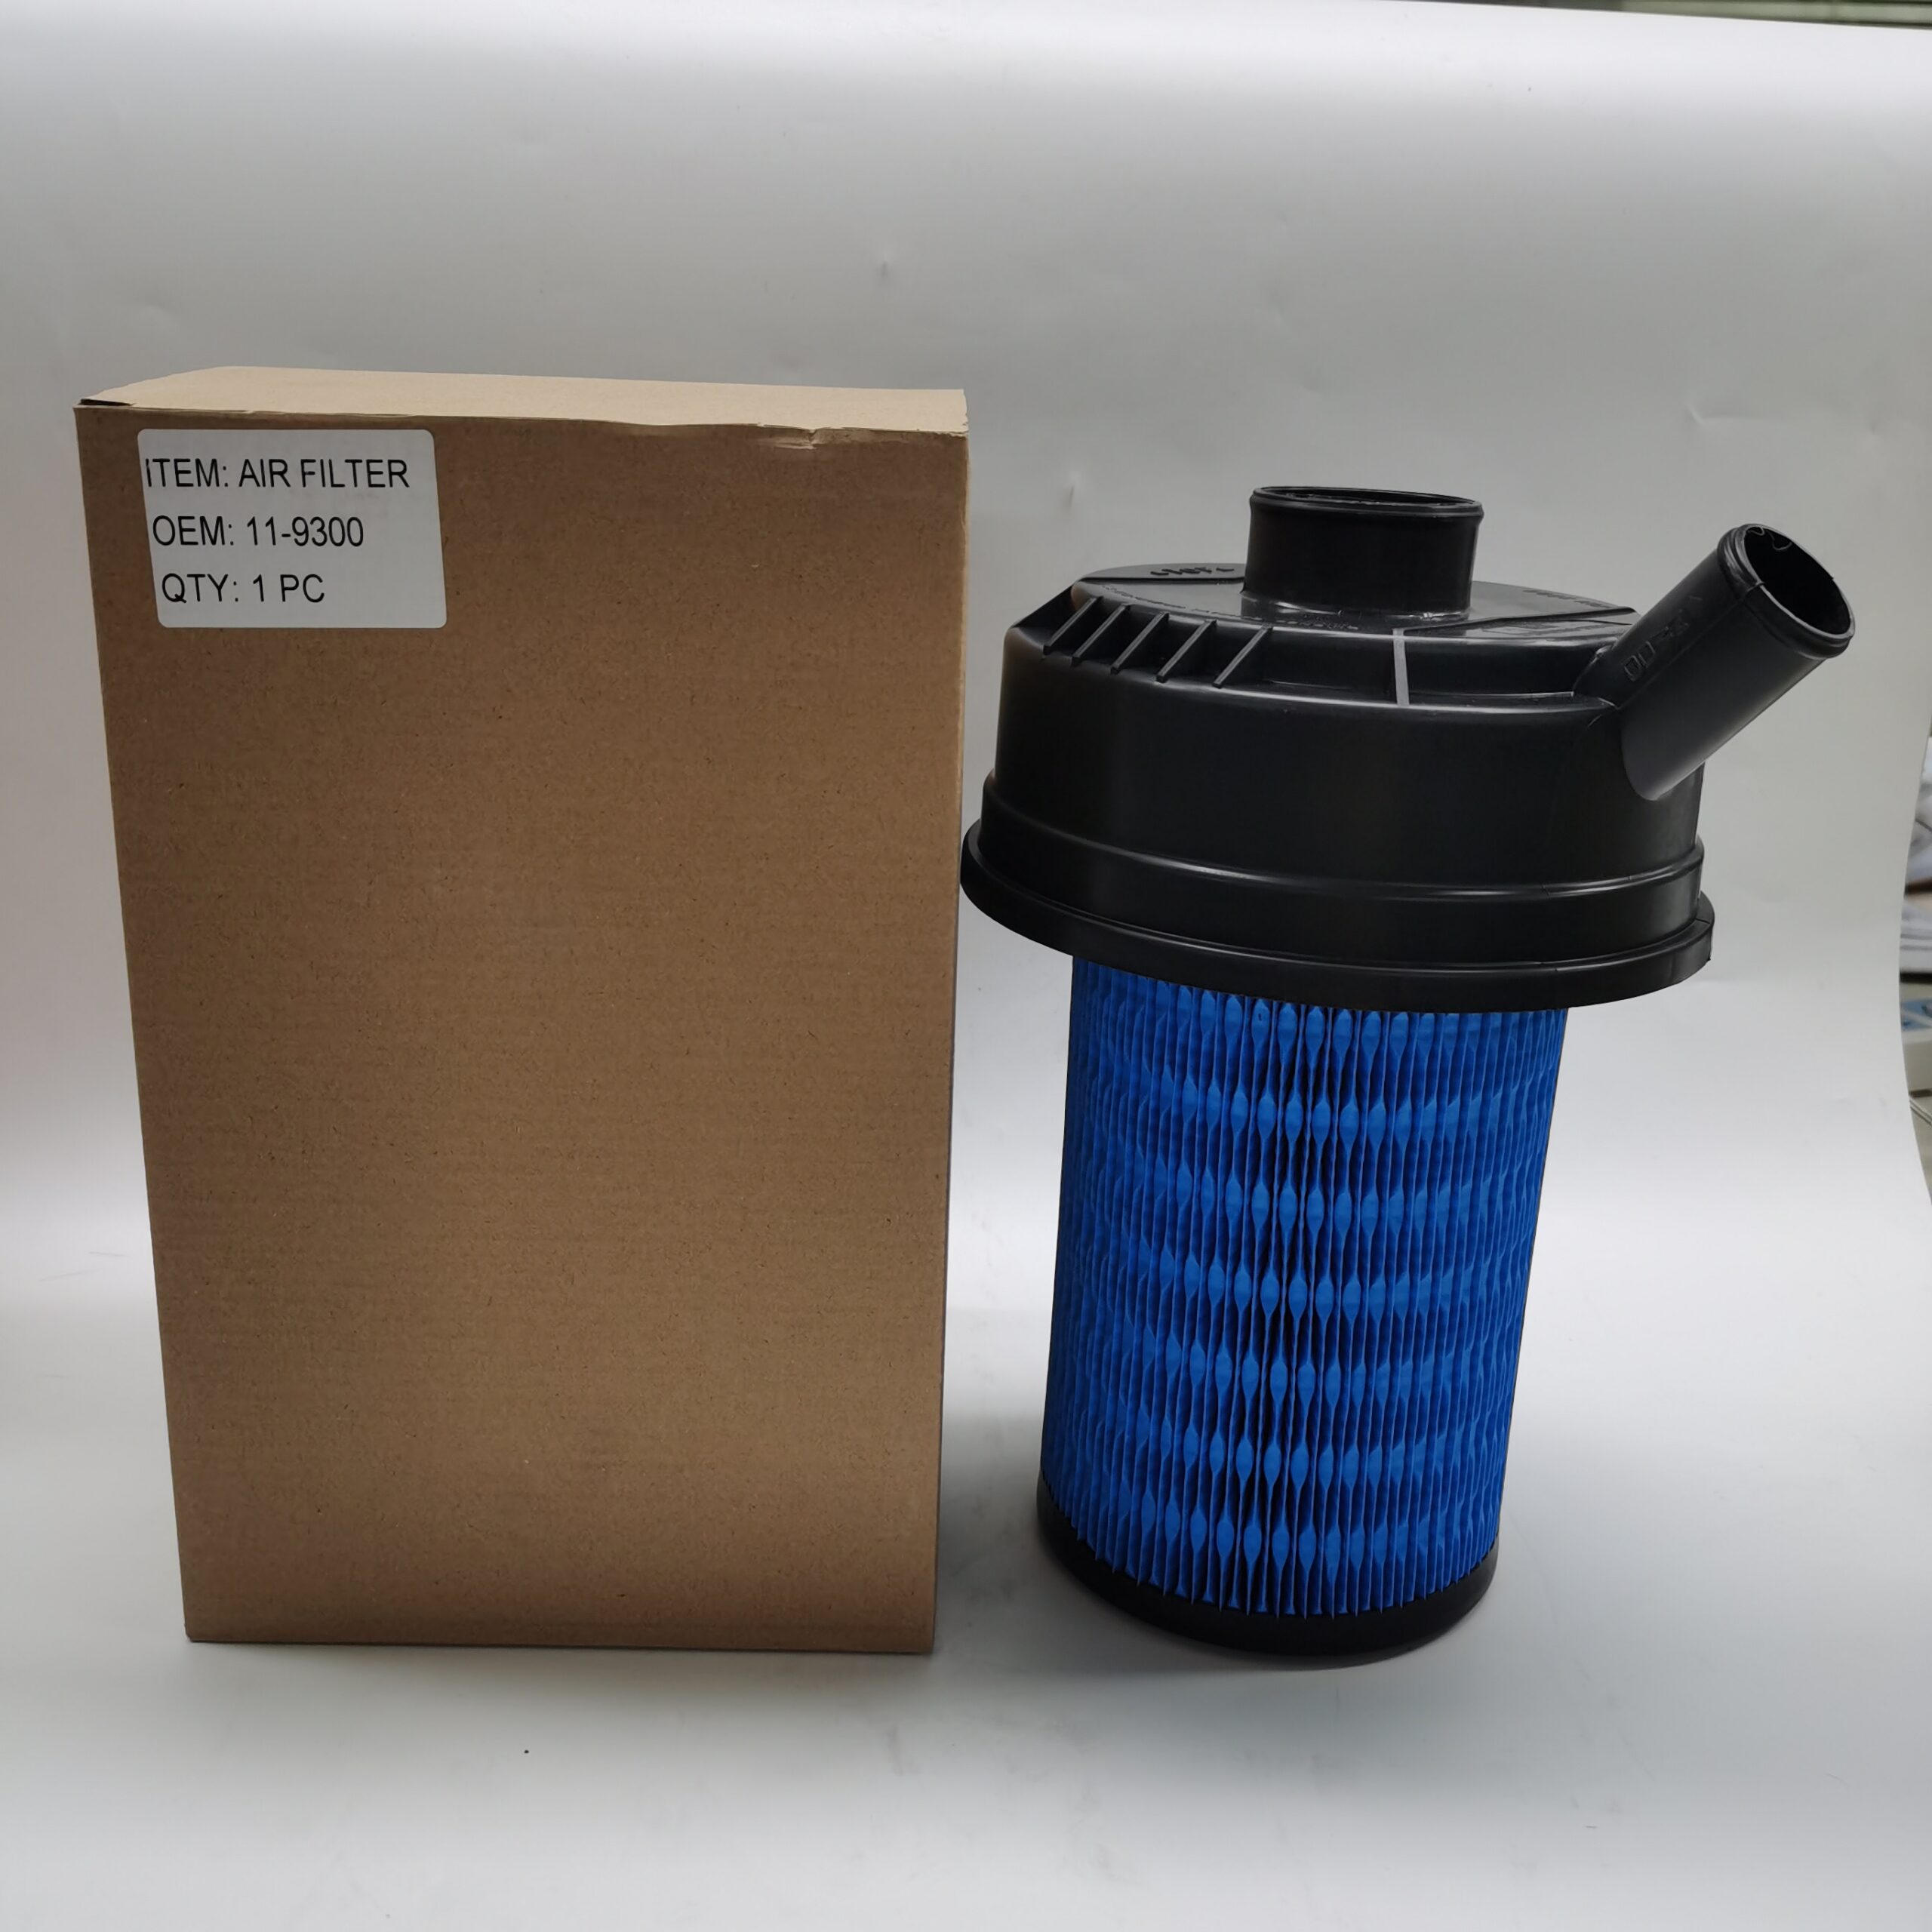 Air filter 11-9300 refrigeration filter for thermo king units